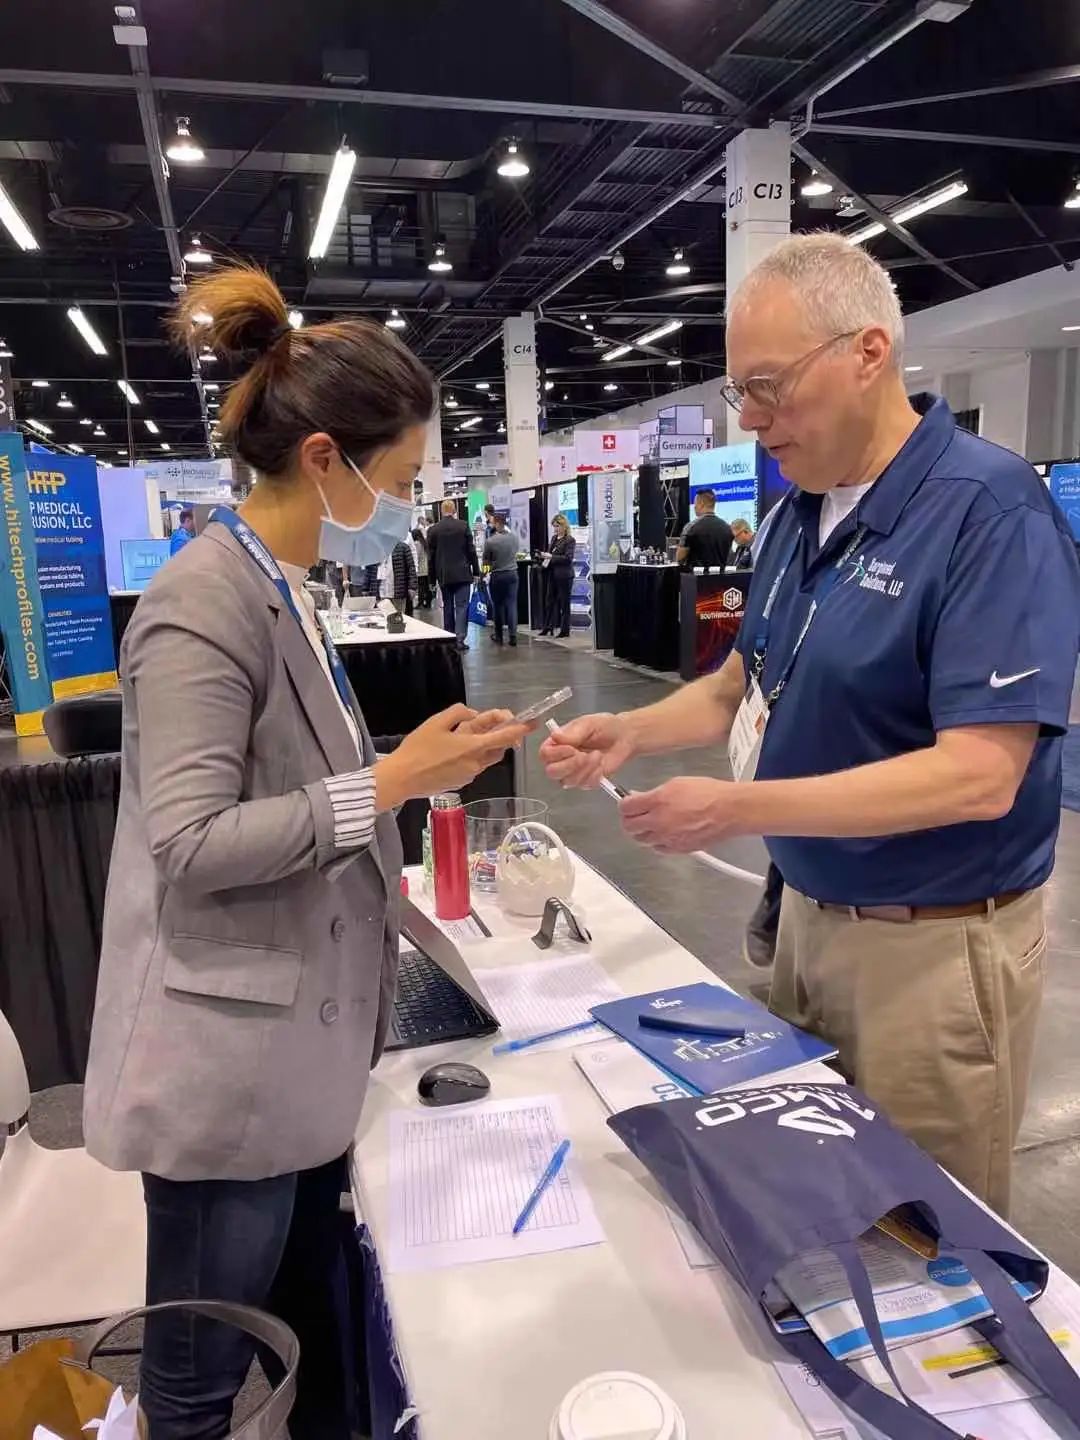 2022 Shanghai Eco Appeared at MD&M WEST American Medical Device Design Exhibition